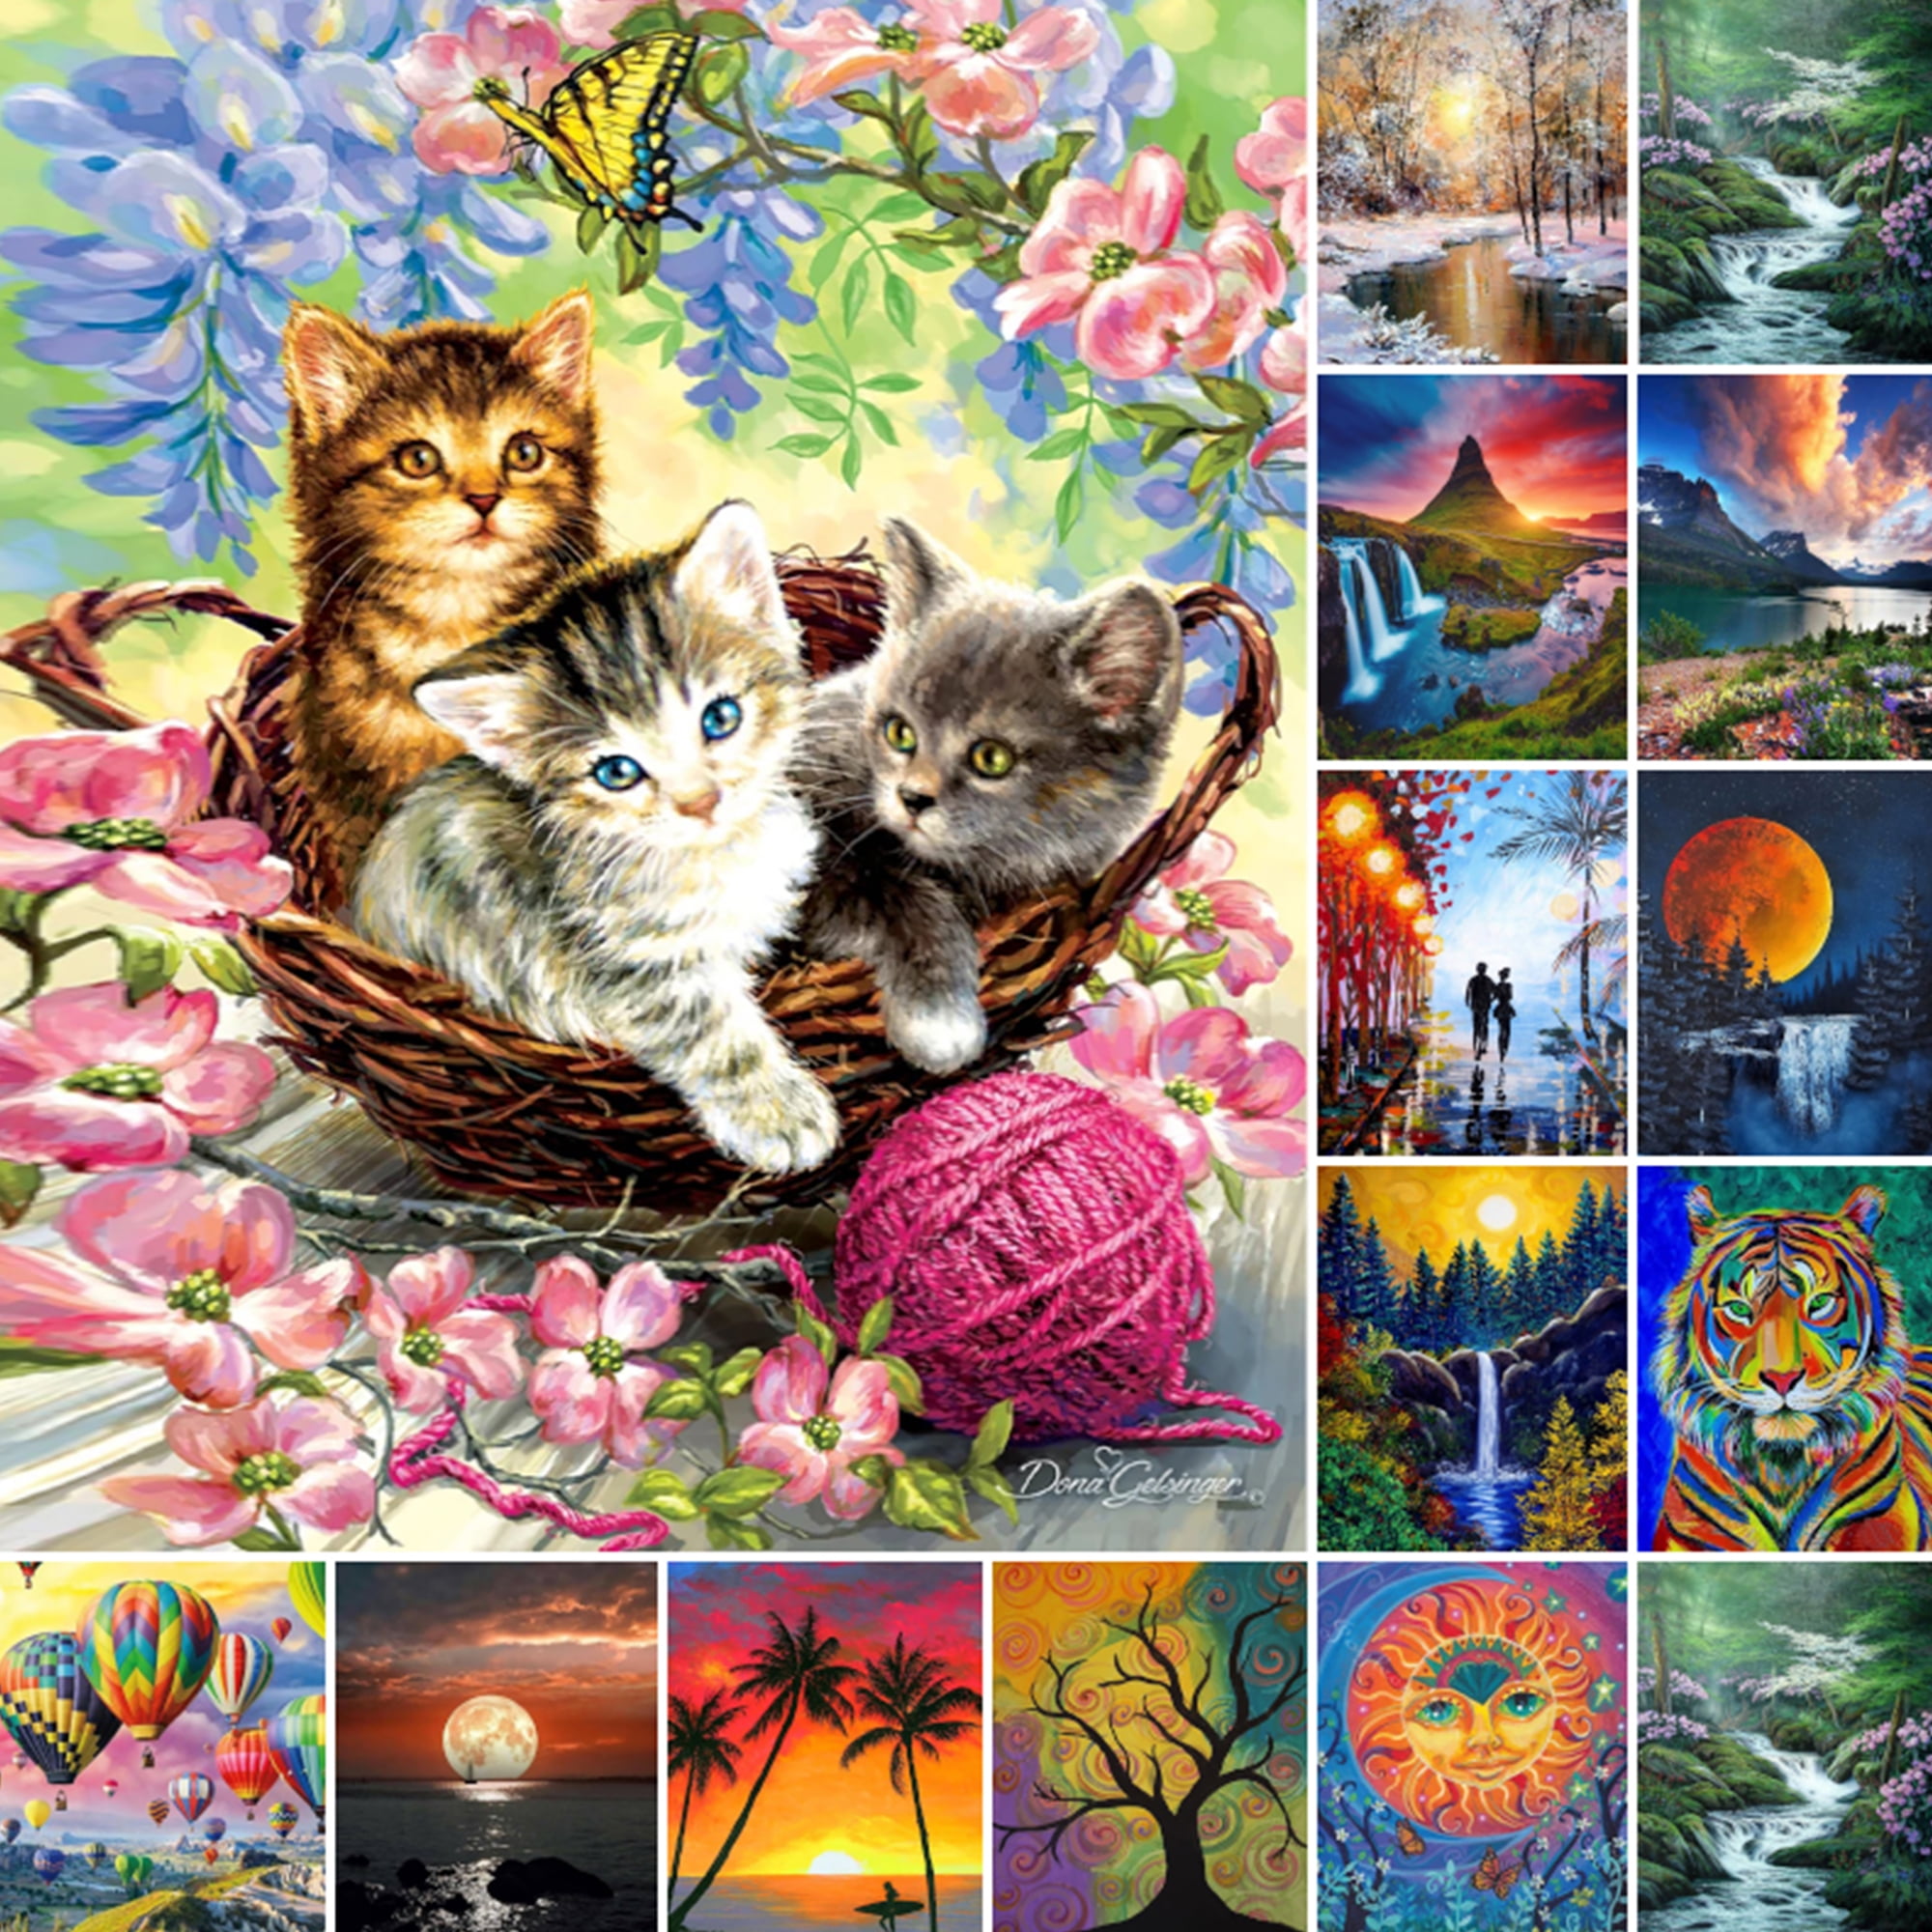 5D Diamond Painting Cross Stitch Kits Art Embroidery Decors DIY Cross Stitch Crystal Rhinestone Embroidery Pictures Art Kit with Premium Tools Home Wall Decor Dream Dolphin